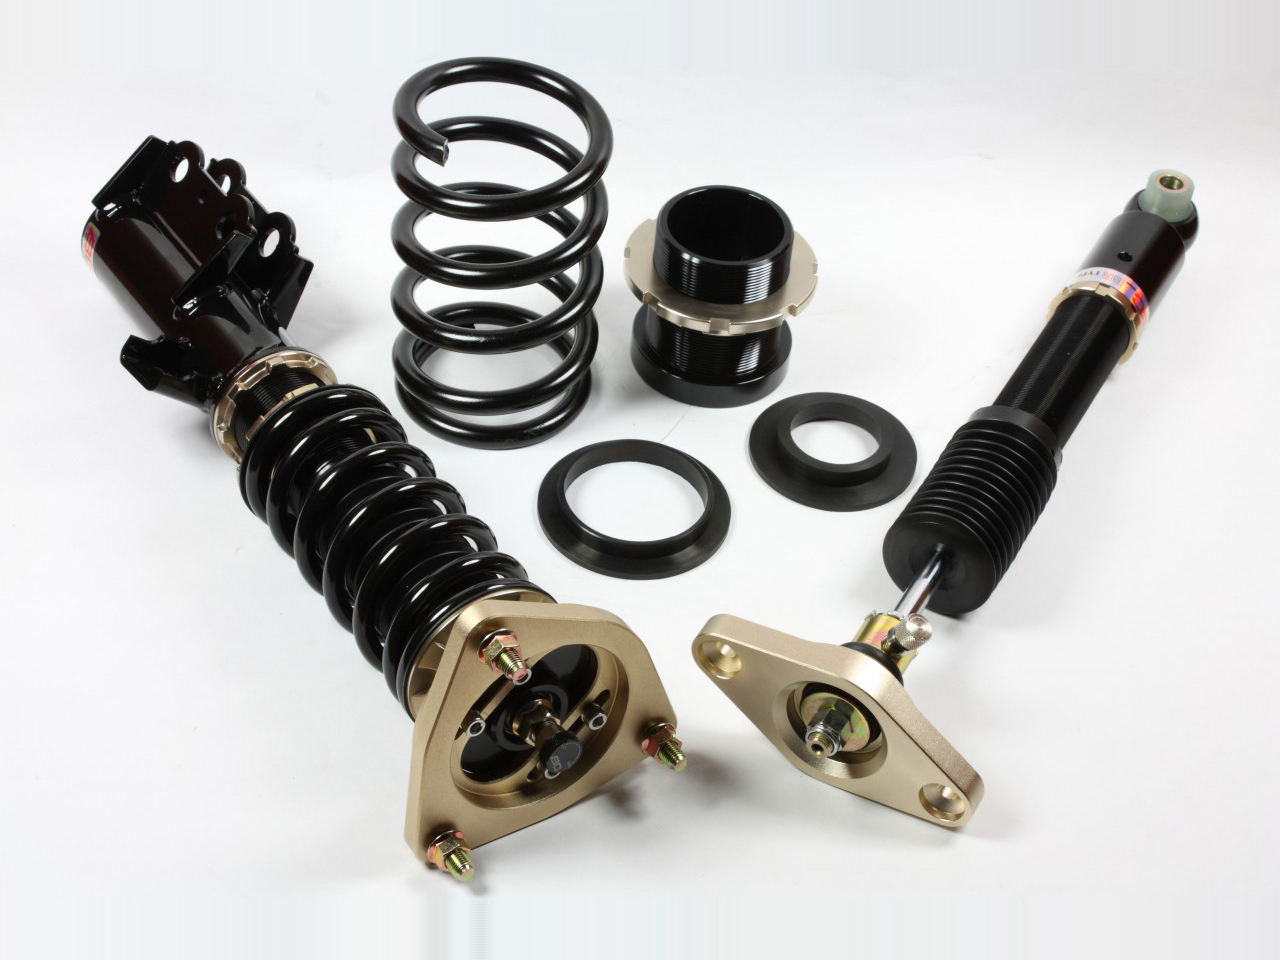 BC Racing Coilovers